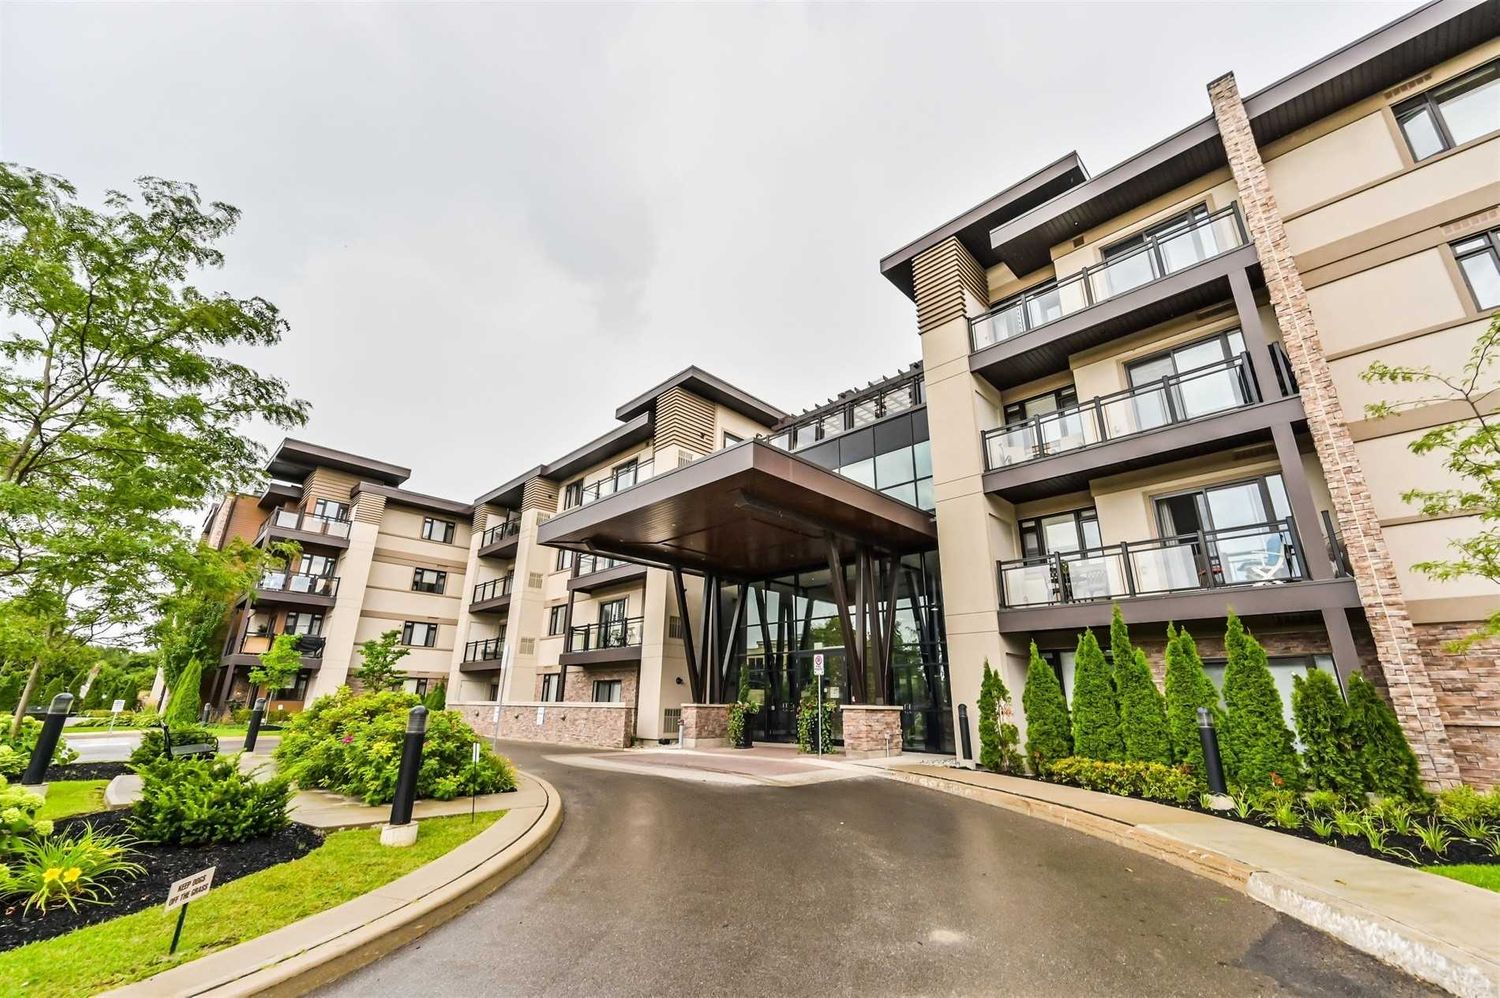 128 Garden Drive. Wyndham Place Condos is located in  Oakville, Toronto - image #2 of 3